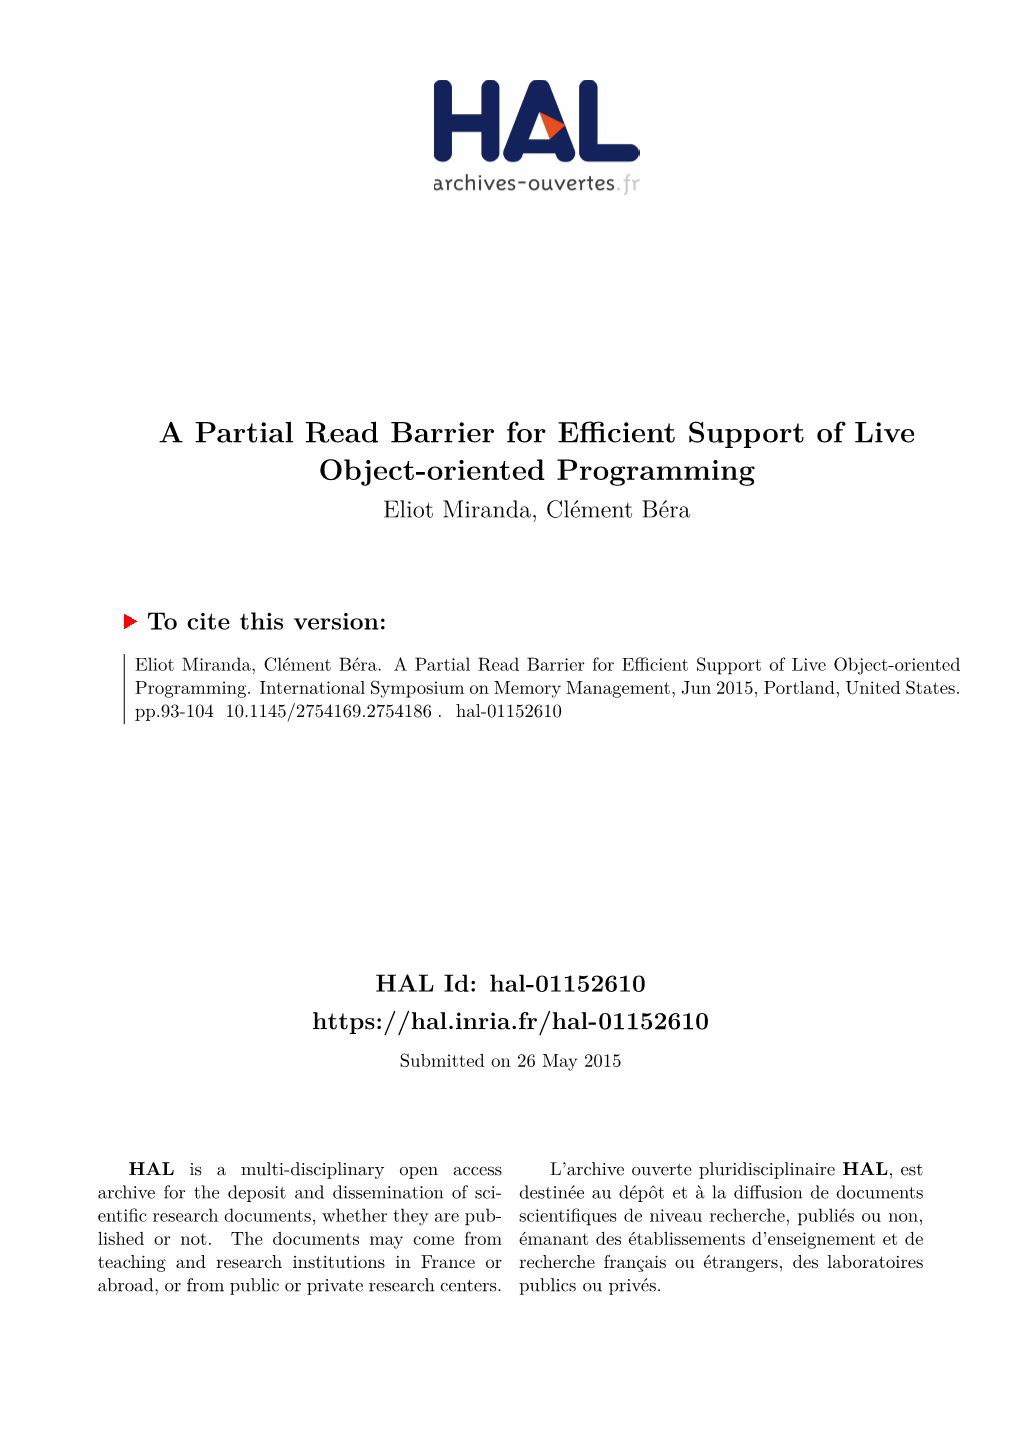 A Partial Read Barrier for Efficient Support of Live Object-Oriented